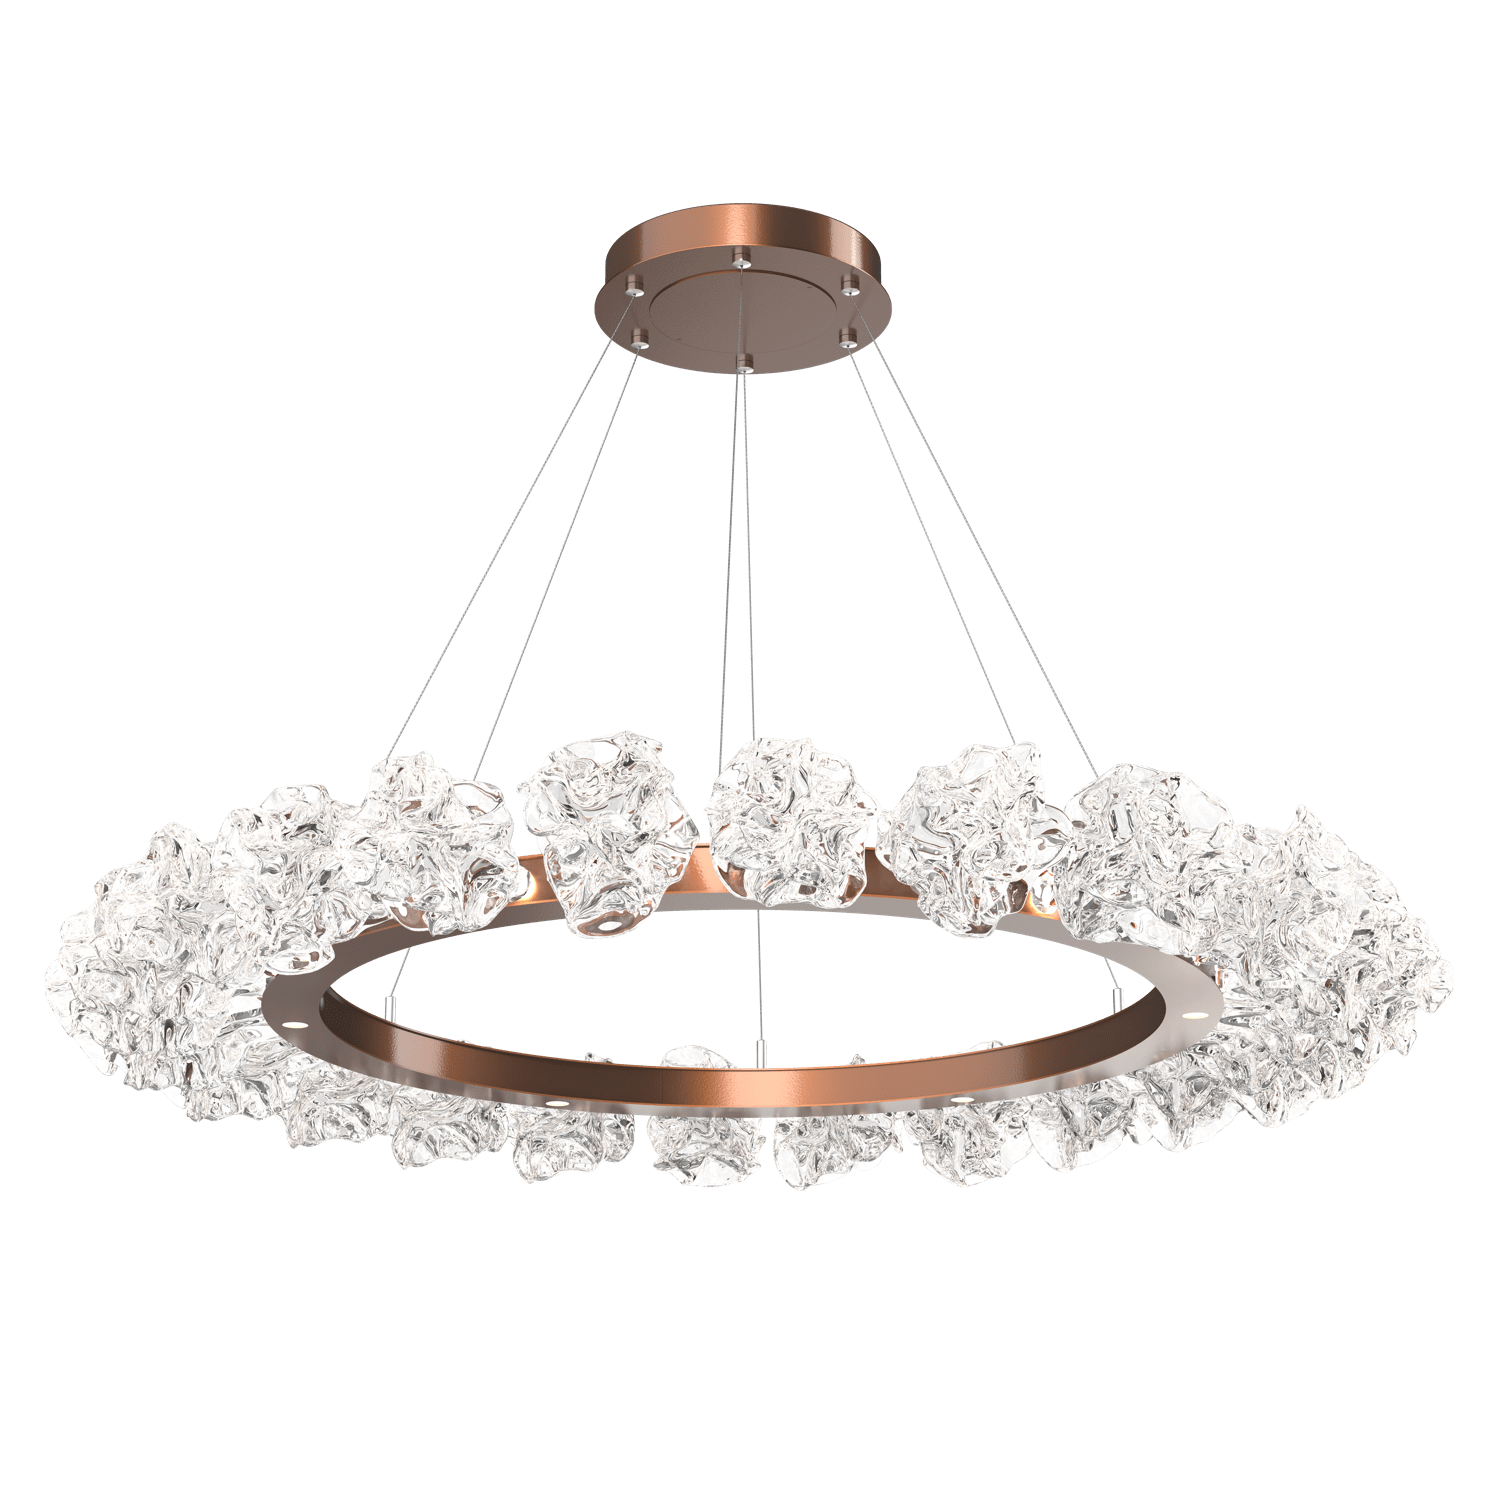 CHB0059-50-BB-Hammerton-Studio-Blossom-50-inch-radial-ring-chandelier-with-burnished-bronze-finish-and-clear-handblown-crystal-glass-shades-and-LED-lamping